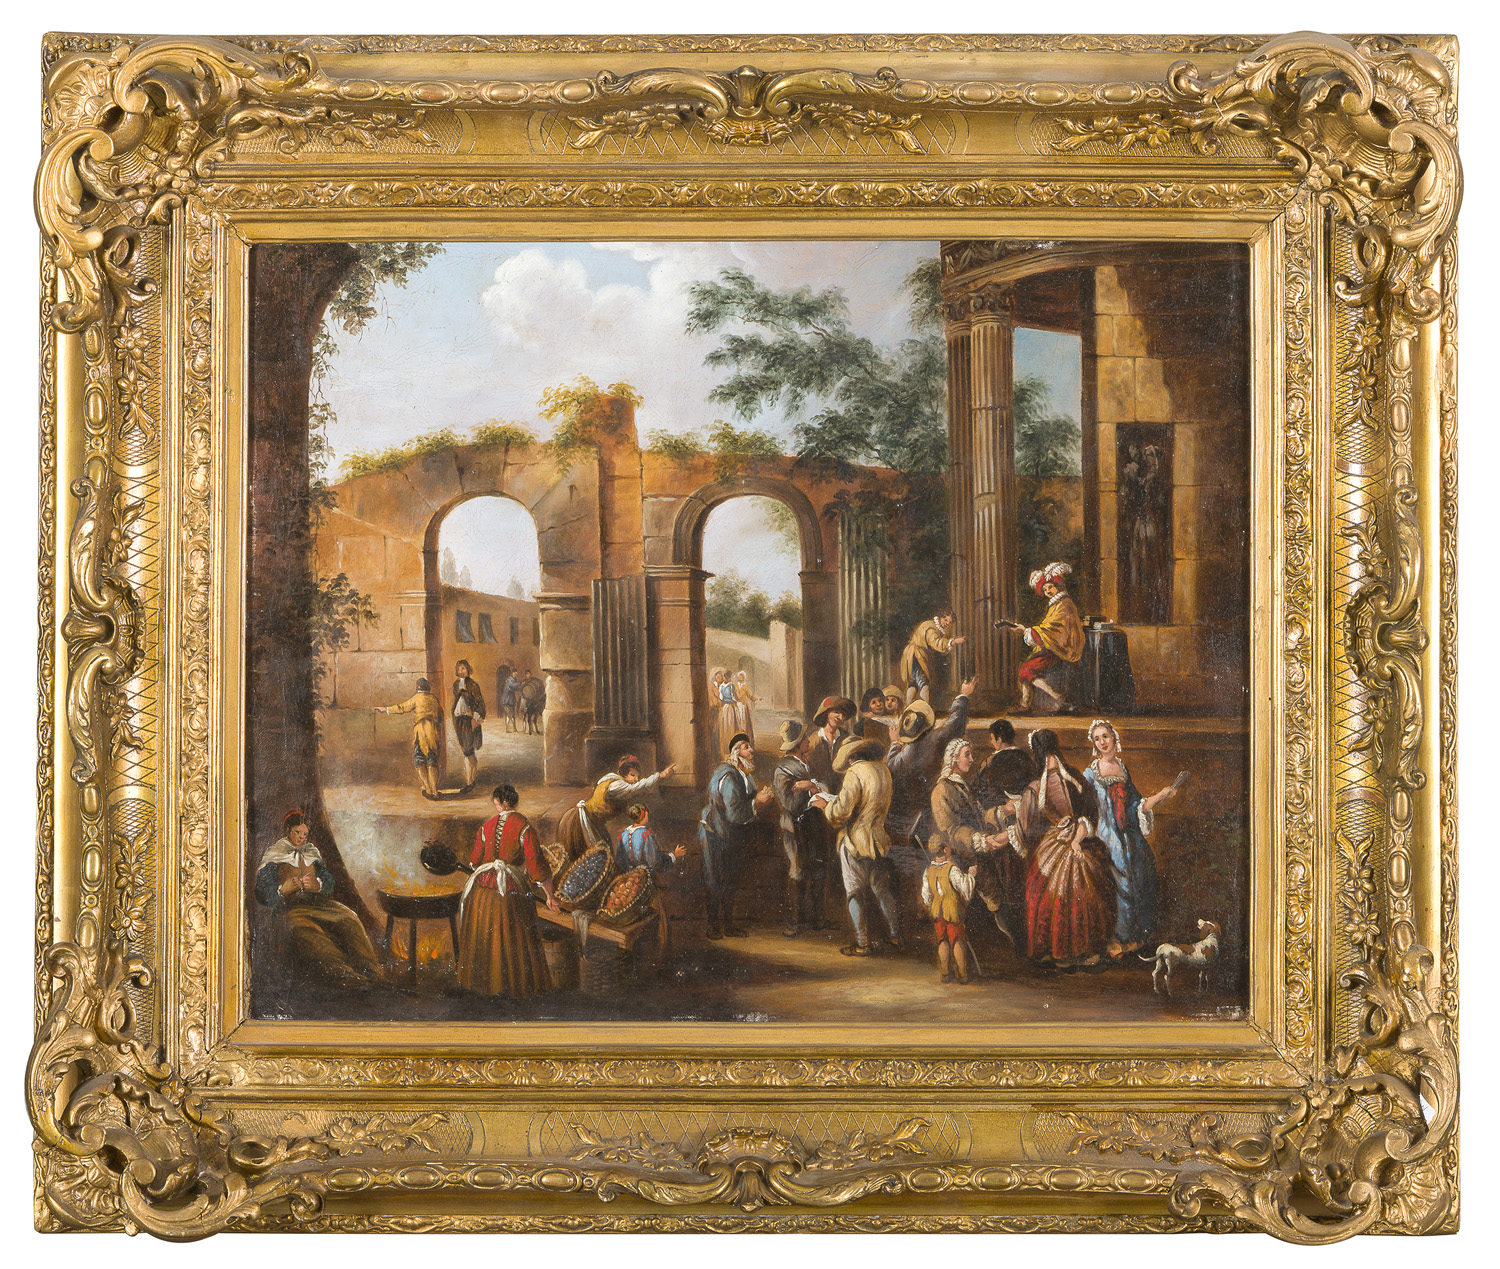 OIL PAINTING OF POPULAR SCENE IN A 16TH CENTURY MANNER 20TH CENTURY